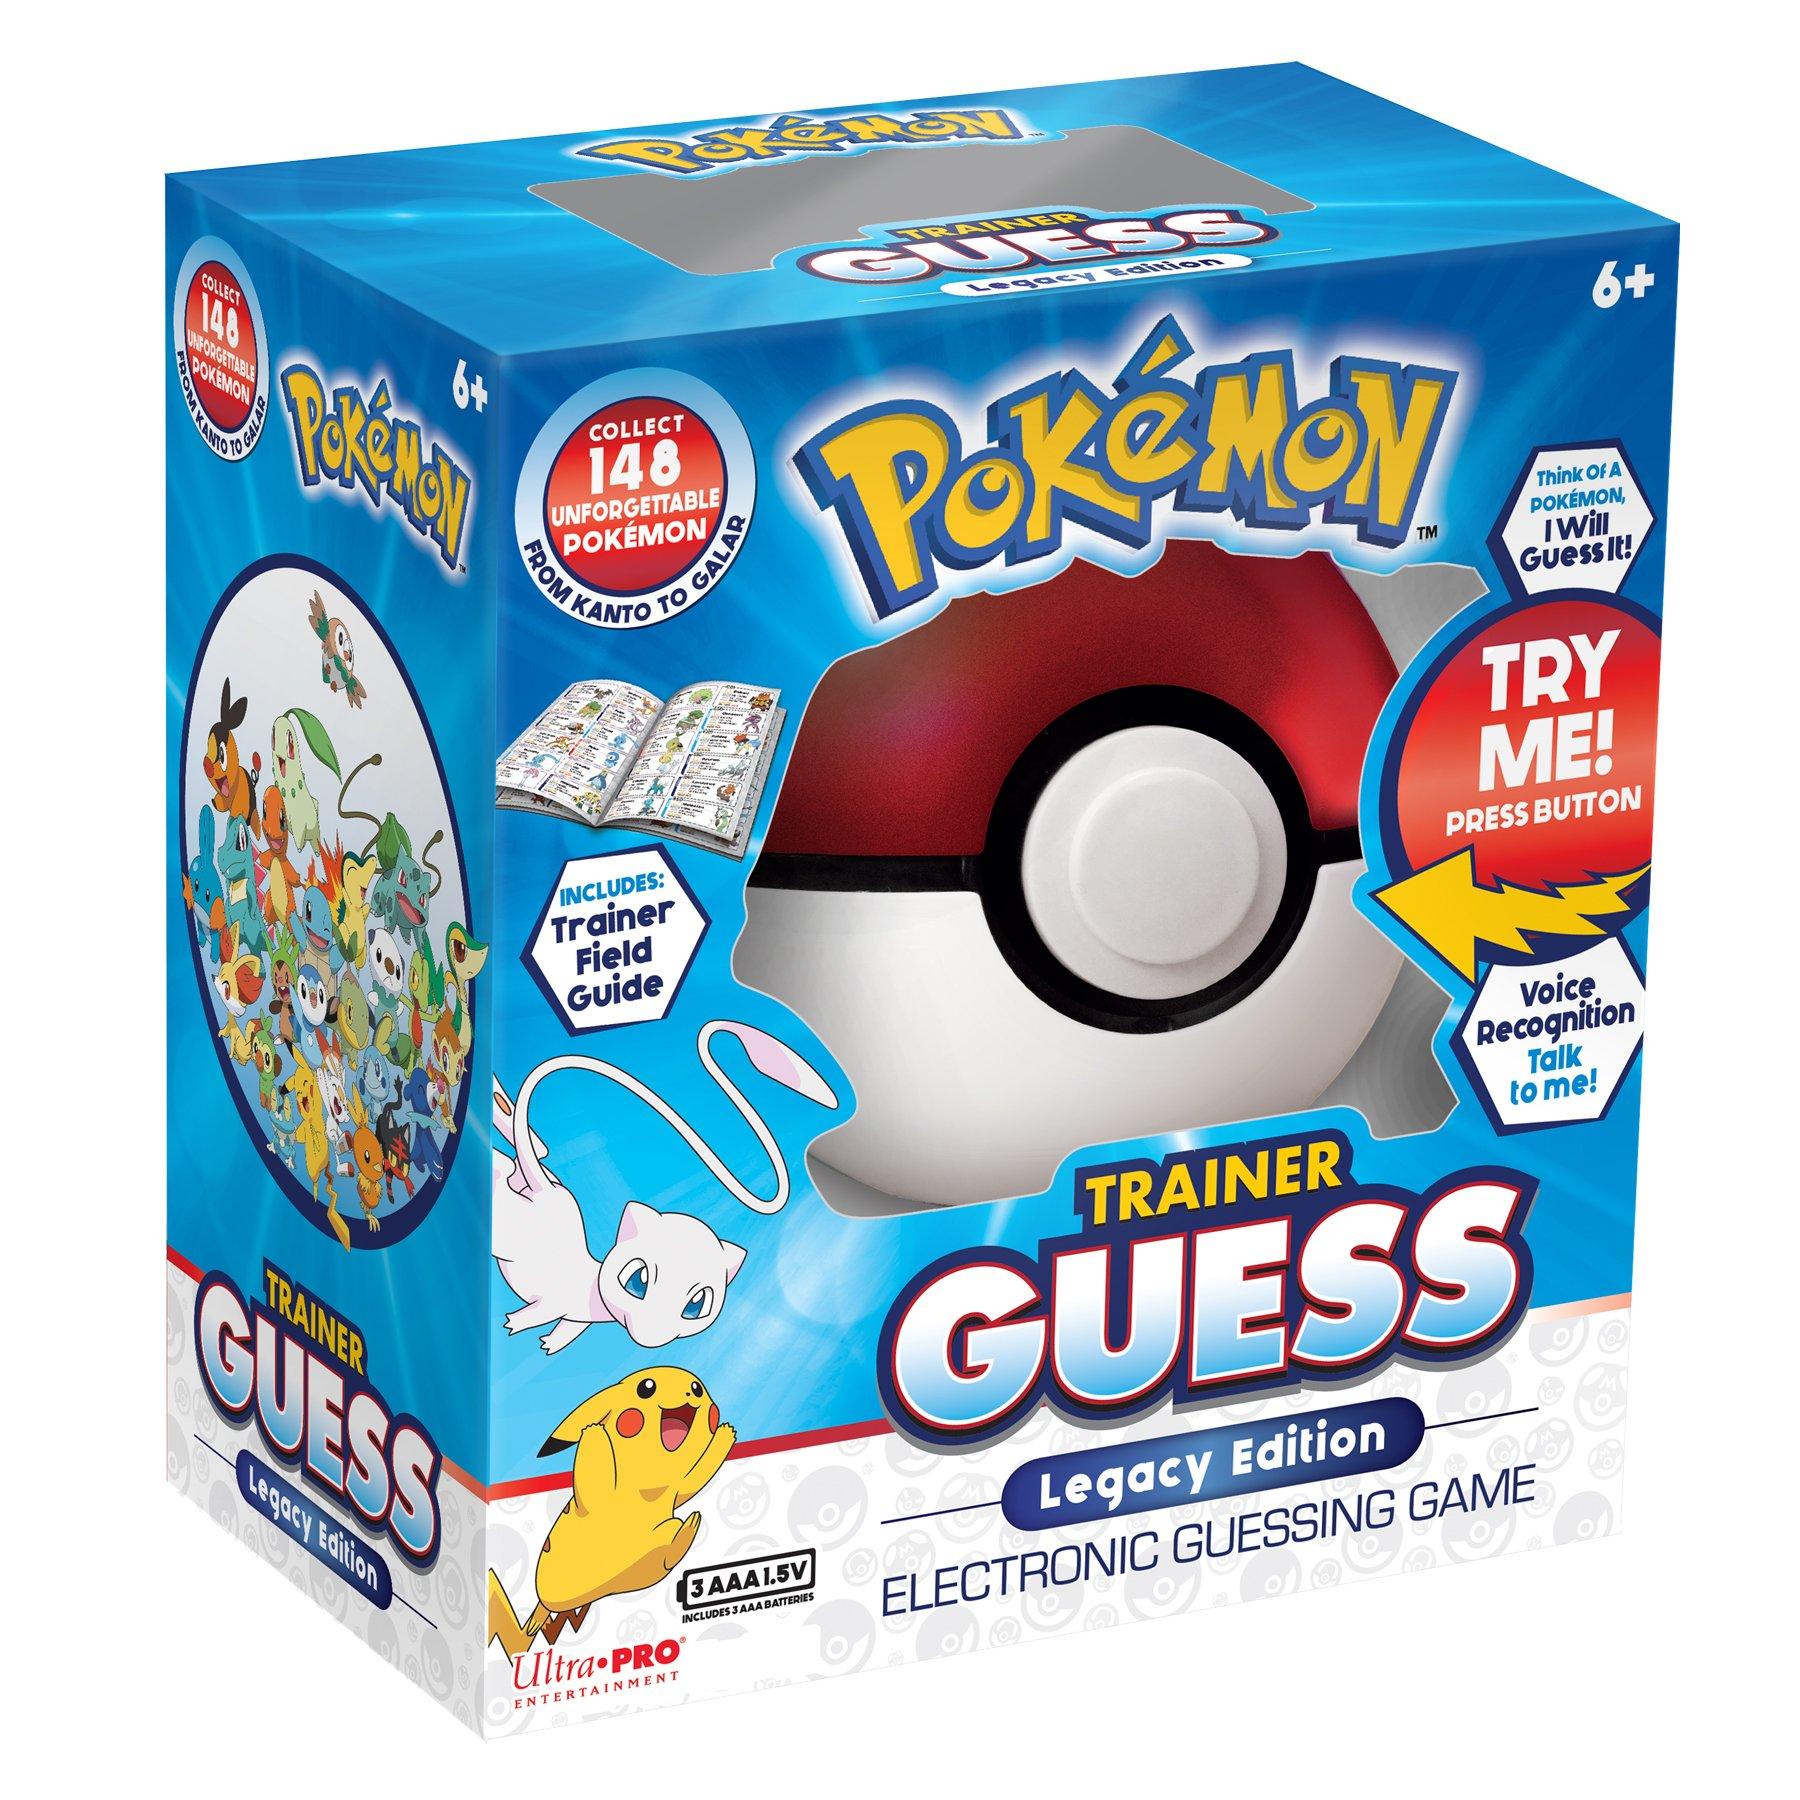 steeg Robijn Heup Ultra Pro Pokemon Trainer Guess Legacy Electronic Guessing Game | GameStop